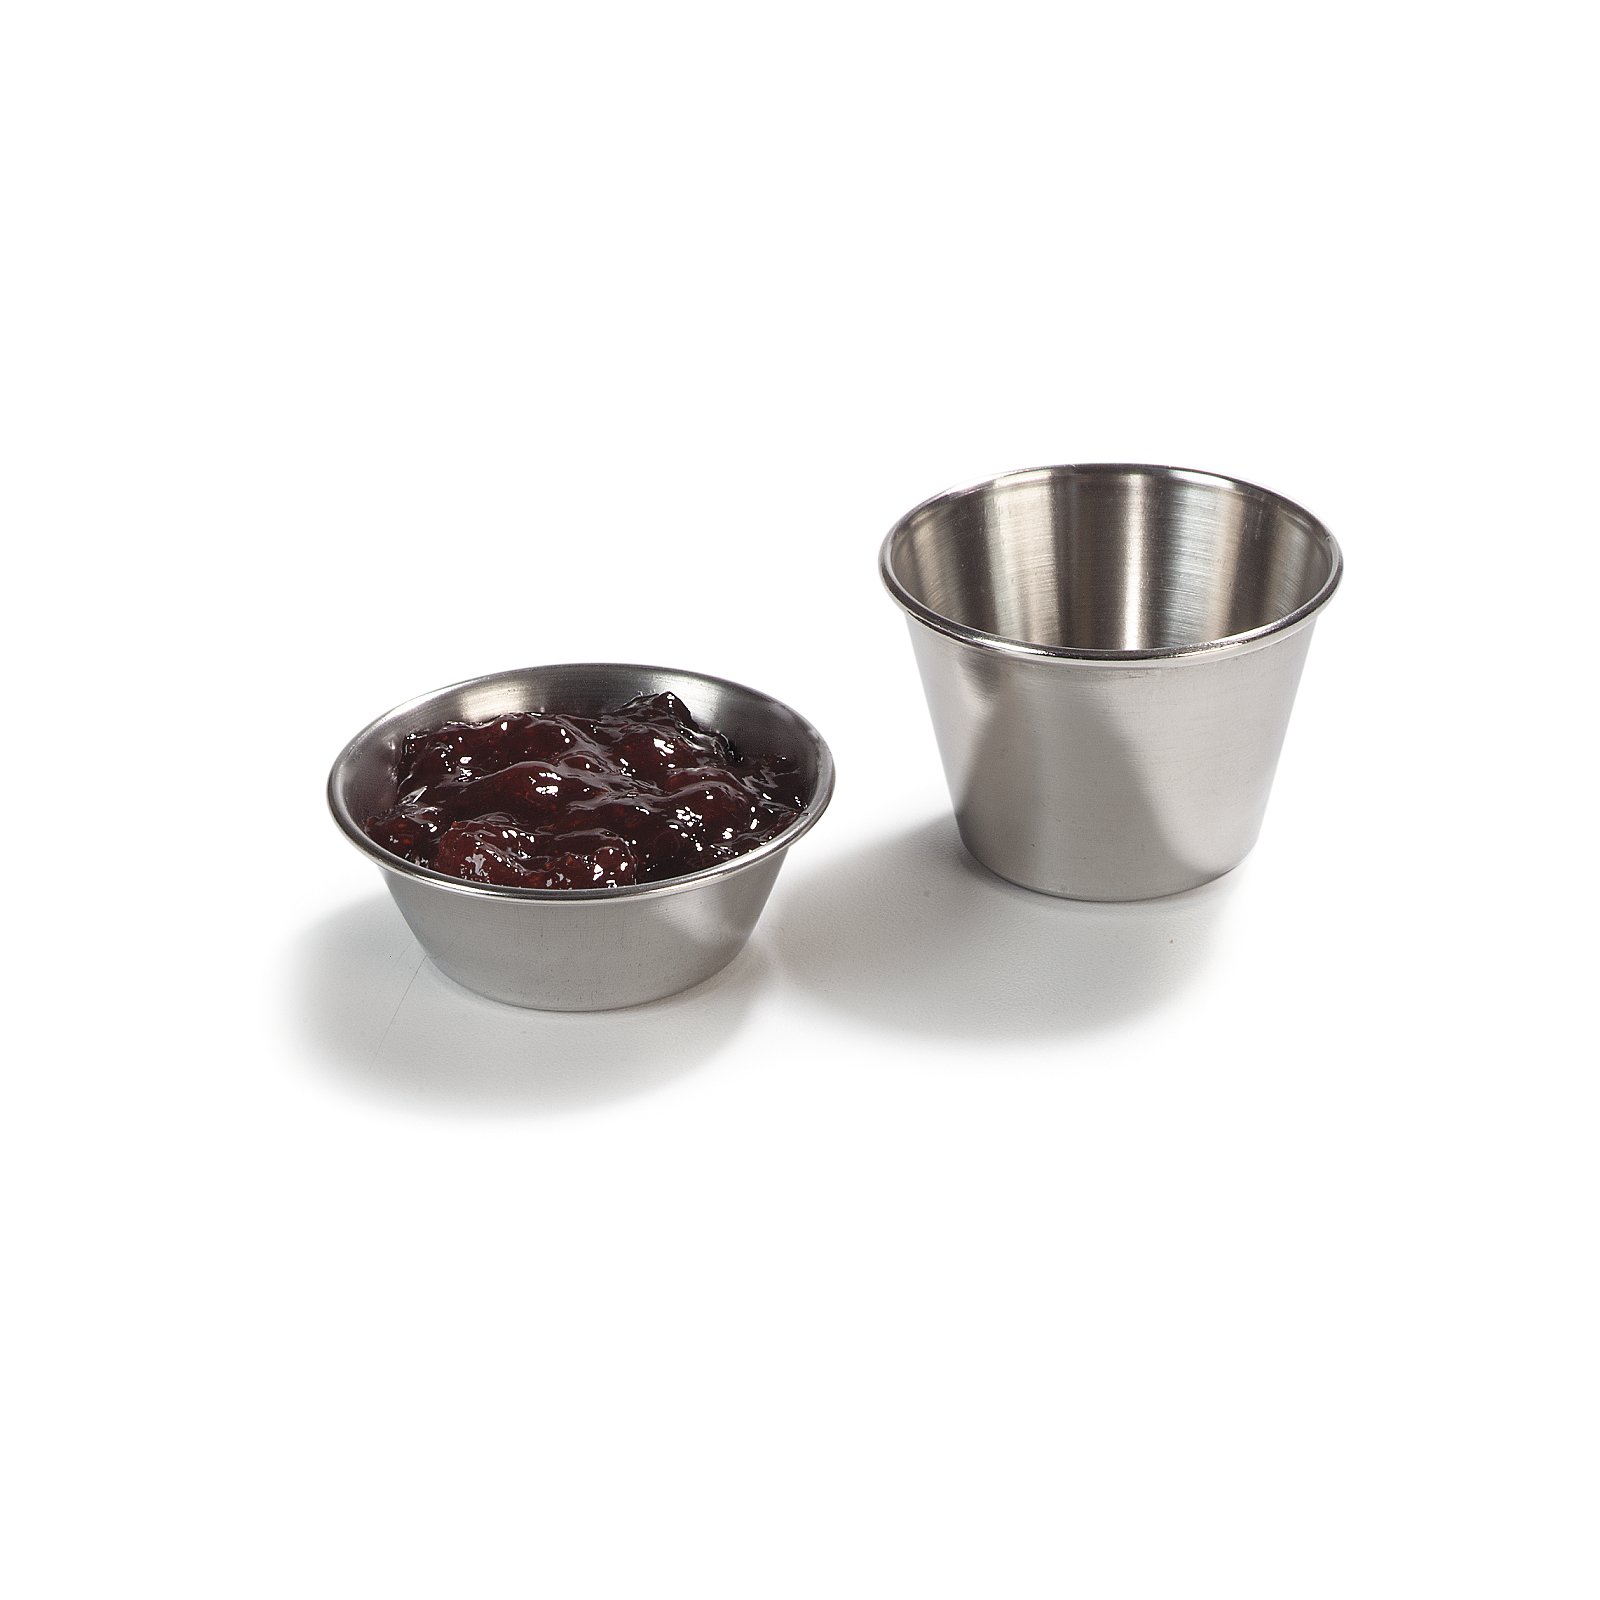 Stainless Steel Sauce Cup - 2 oz - Reading China & Glass